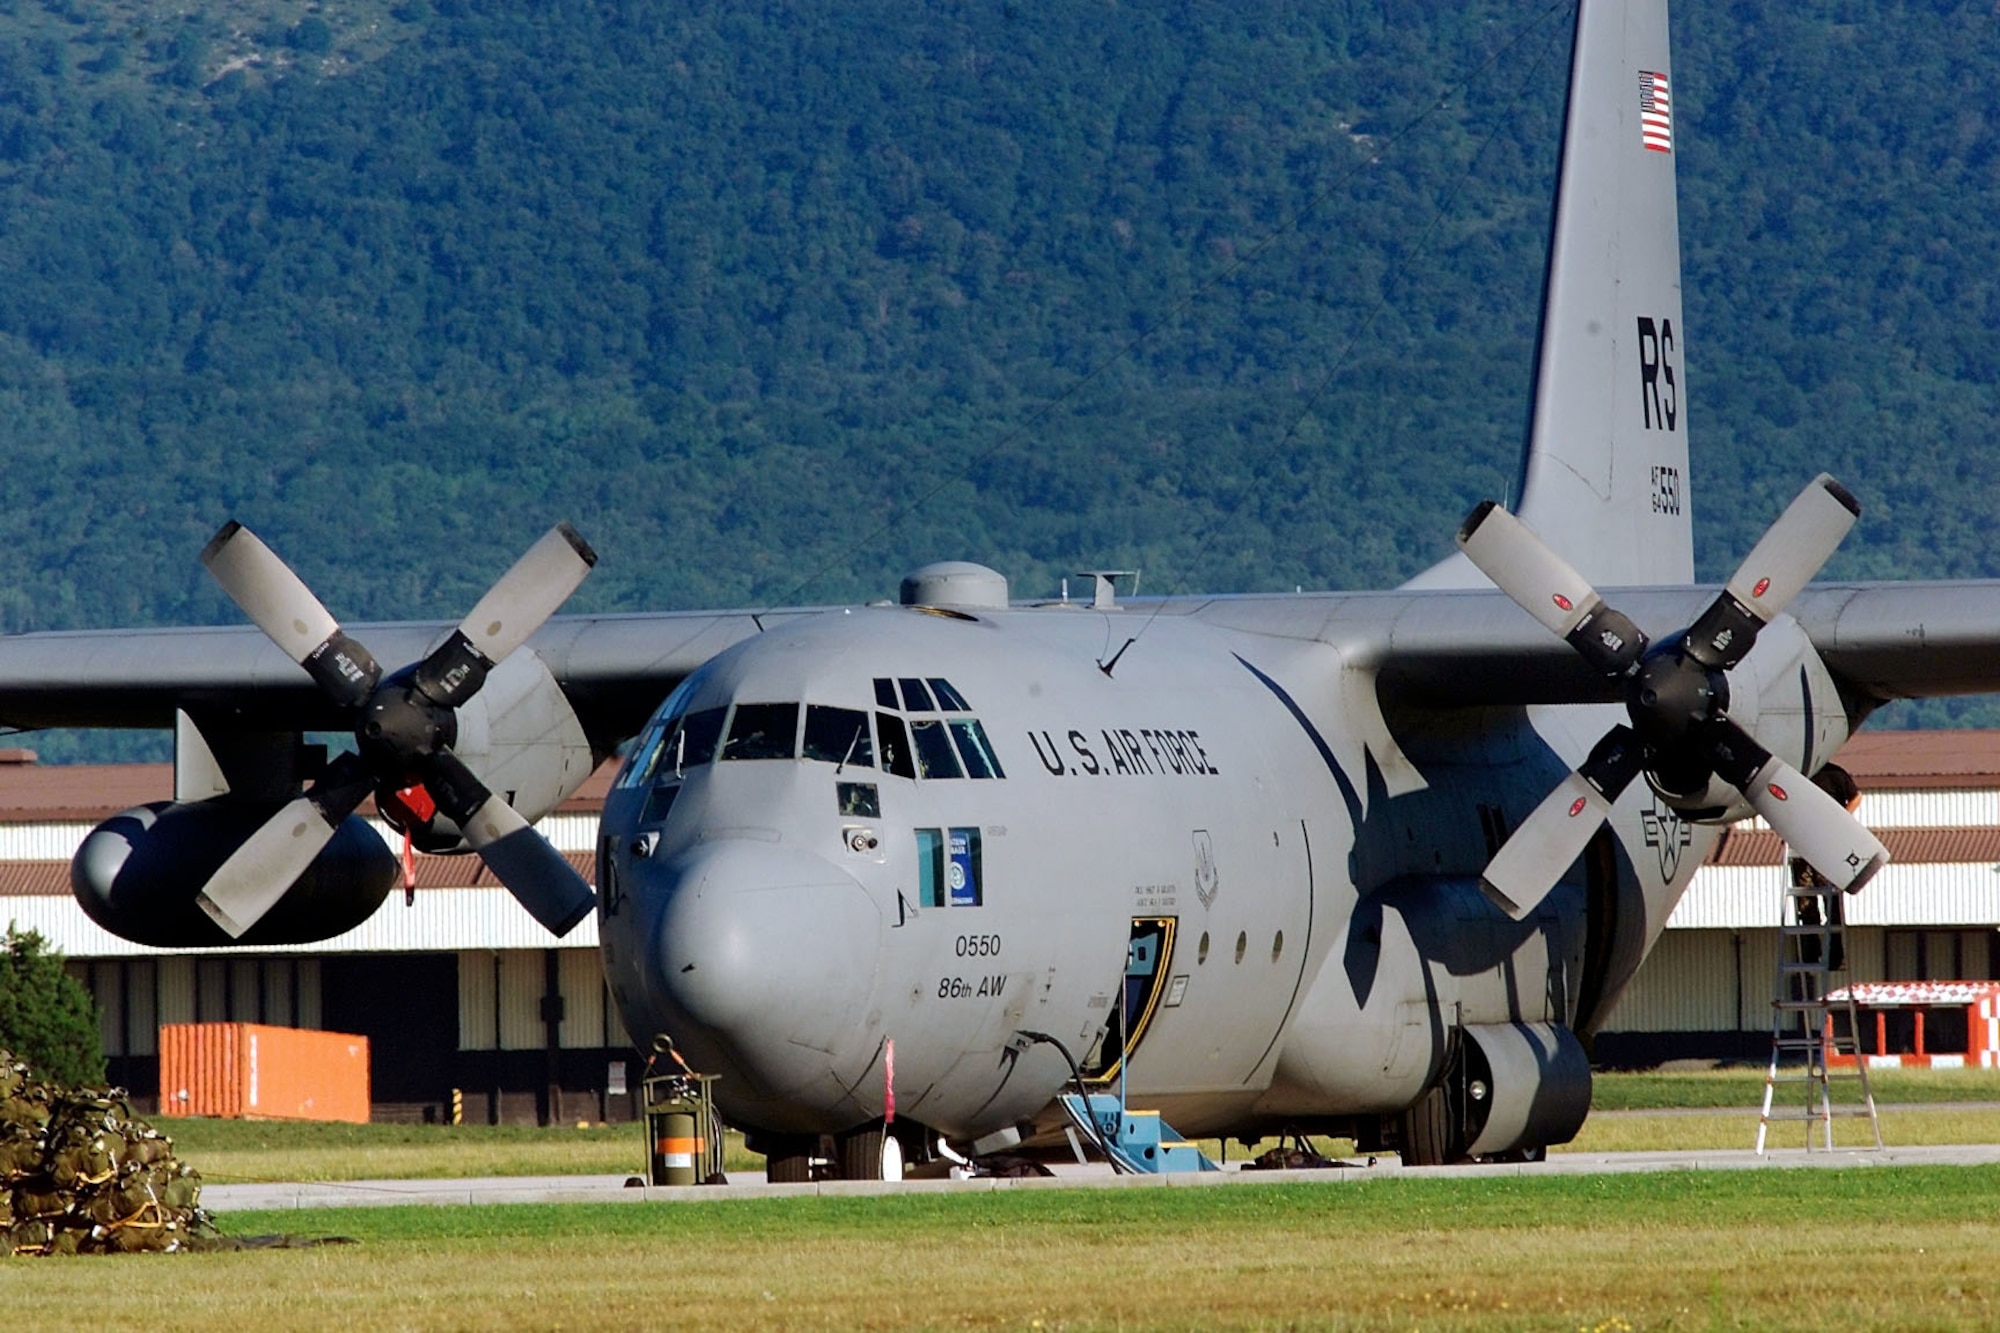 A Ramstein Air Base, Germany, C-130E stands ready at Aviano Air Base, Italy to deliver an Army airborne unit into Bosnia for Rapid Resolve II, a show of force exercise, on July 17, 2000. (U.S. Air Force photo/Senior Airman Aaron D. Allmon II)